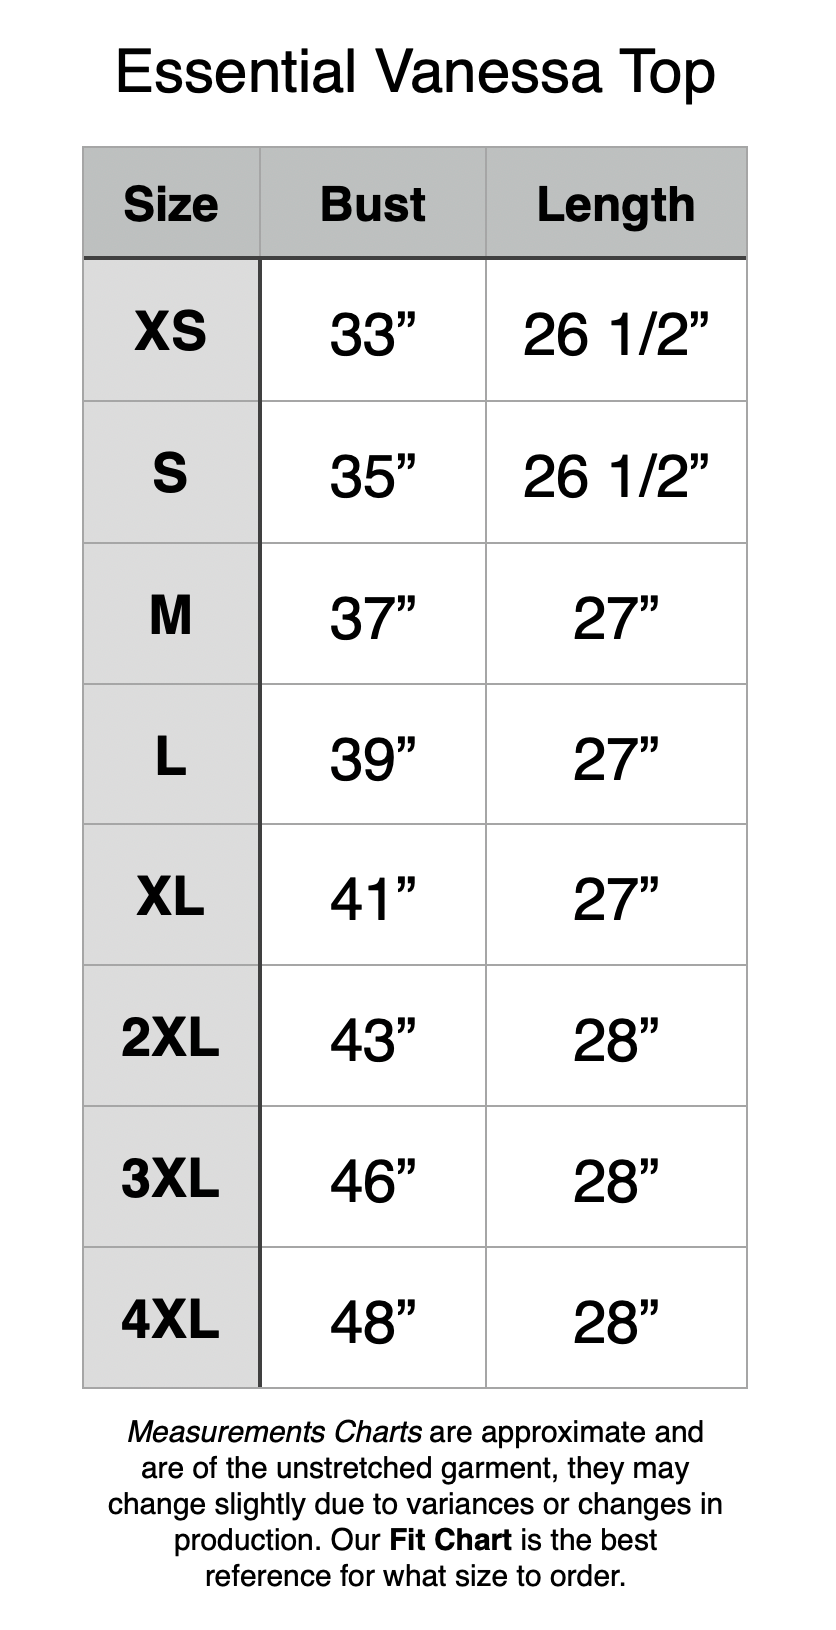 Essential Vanessa Top - XS: 33" Bust, 26.5" Length. S: 35" Bust, 26.5" Length. M: 37" Bust, 27" Length. L: 39" Bust, 27" Length. XL: 41" Bust, 27" Length. 2XL: 43" Bust, 28" Length. 3XL: 46" Bust, 28" Length. 4XL: 48" Bust, 28" Length.